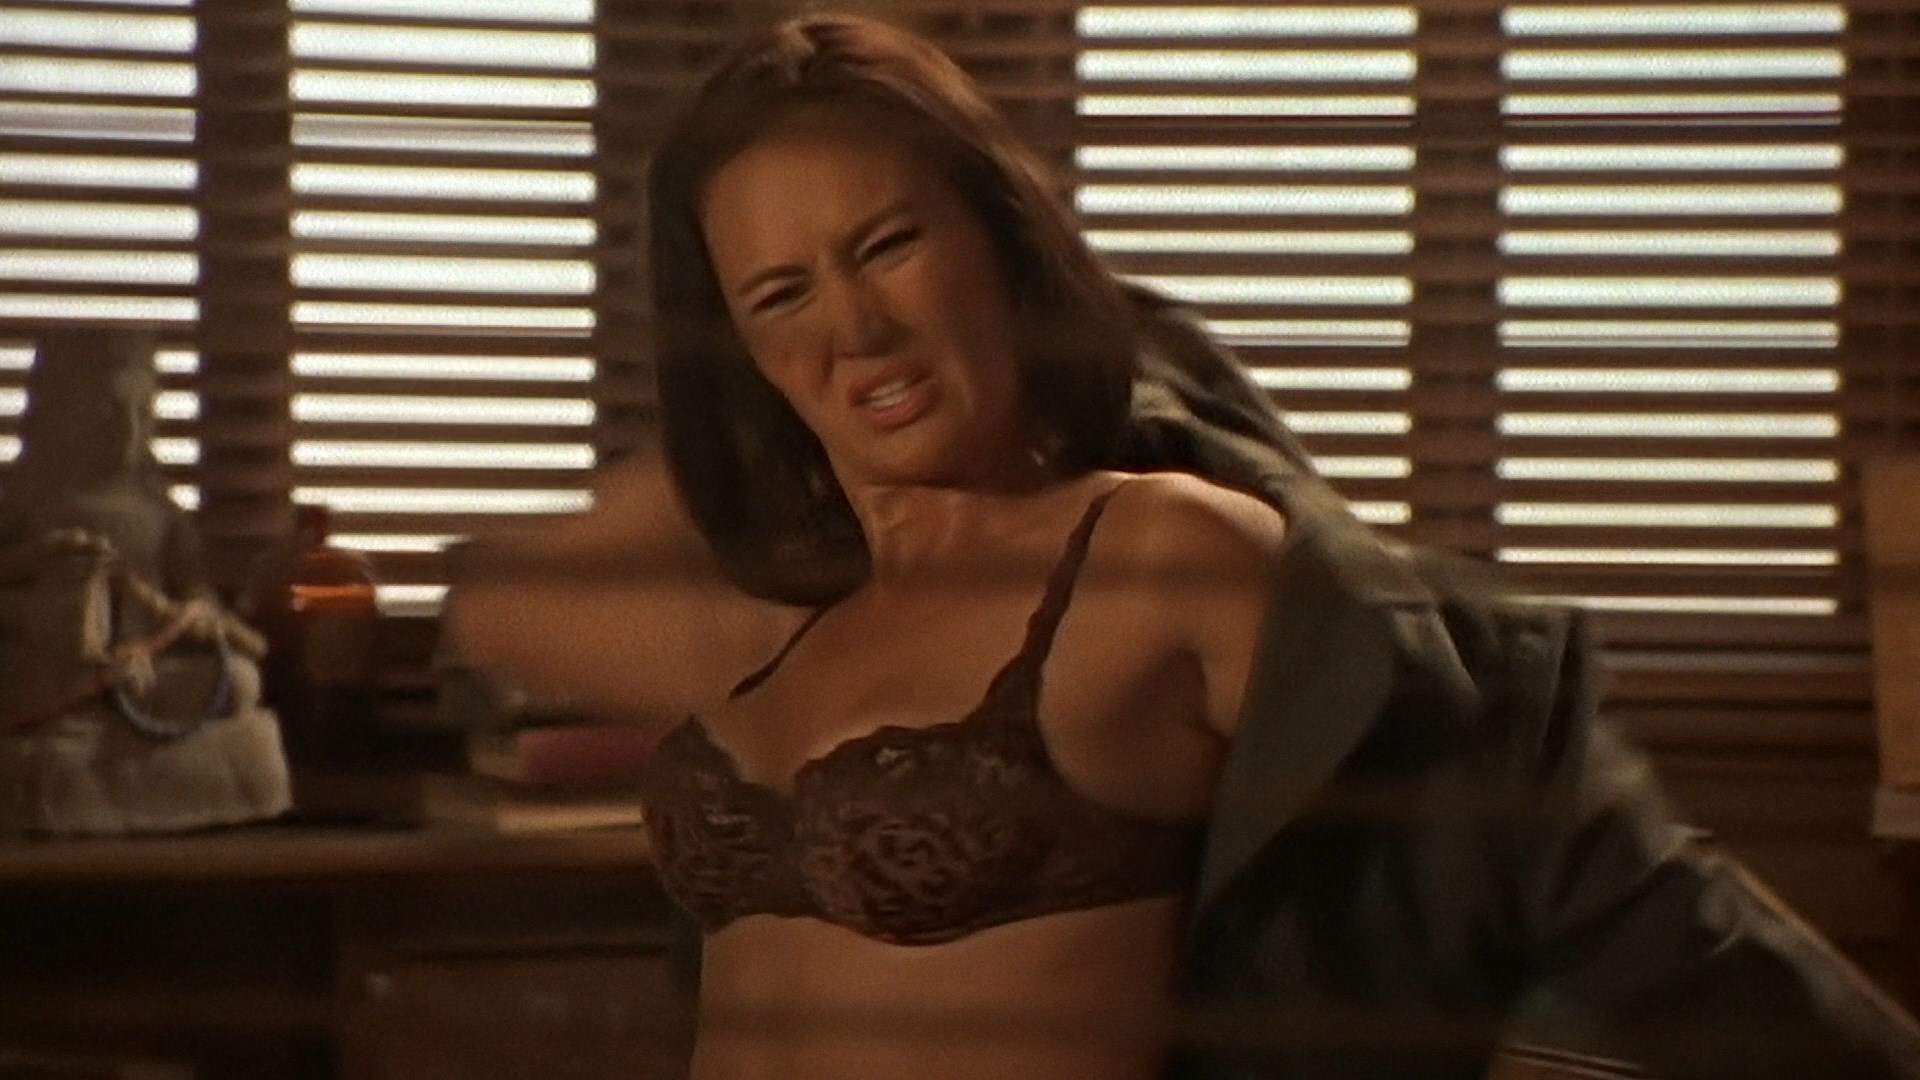 Tia Carrere, Lindy Booth - Relic Hunter S1 - 1080p.